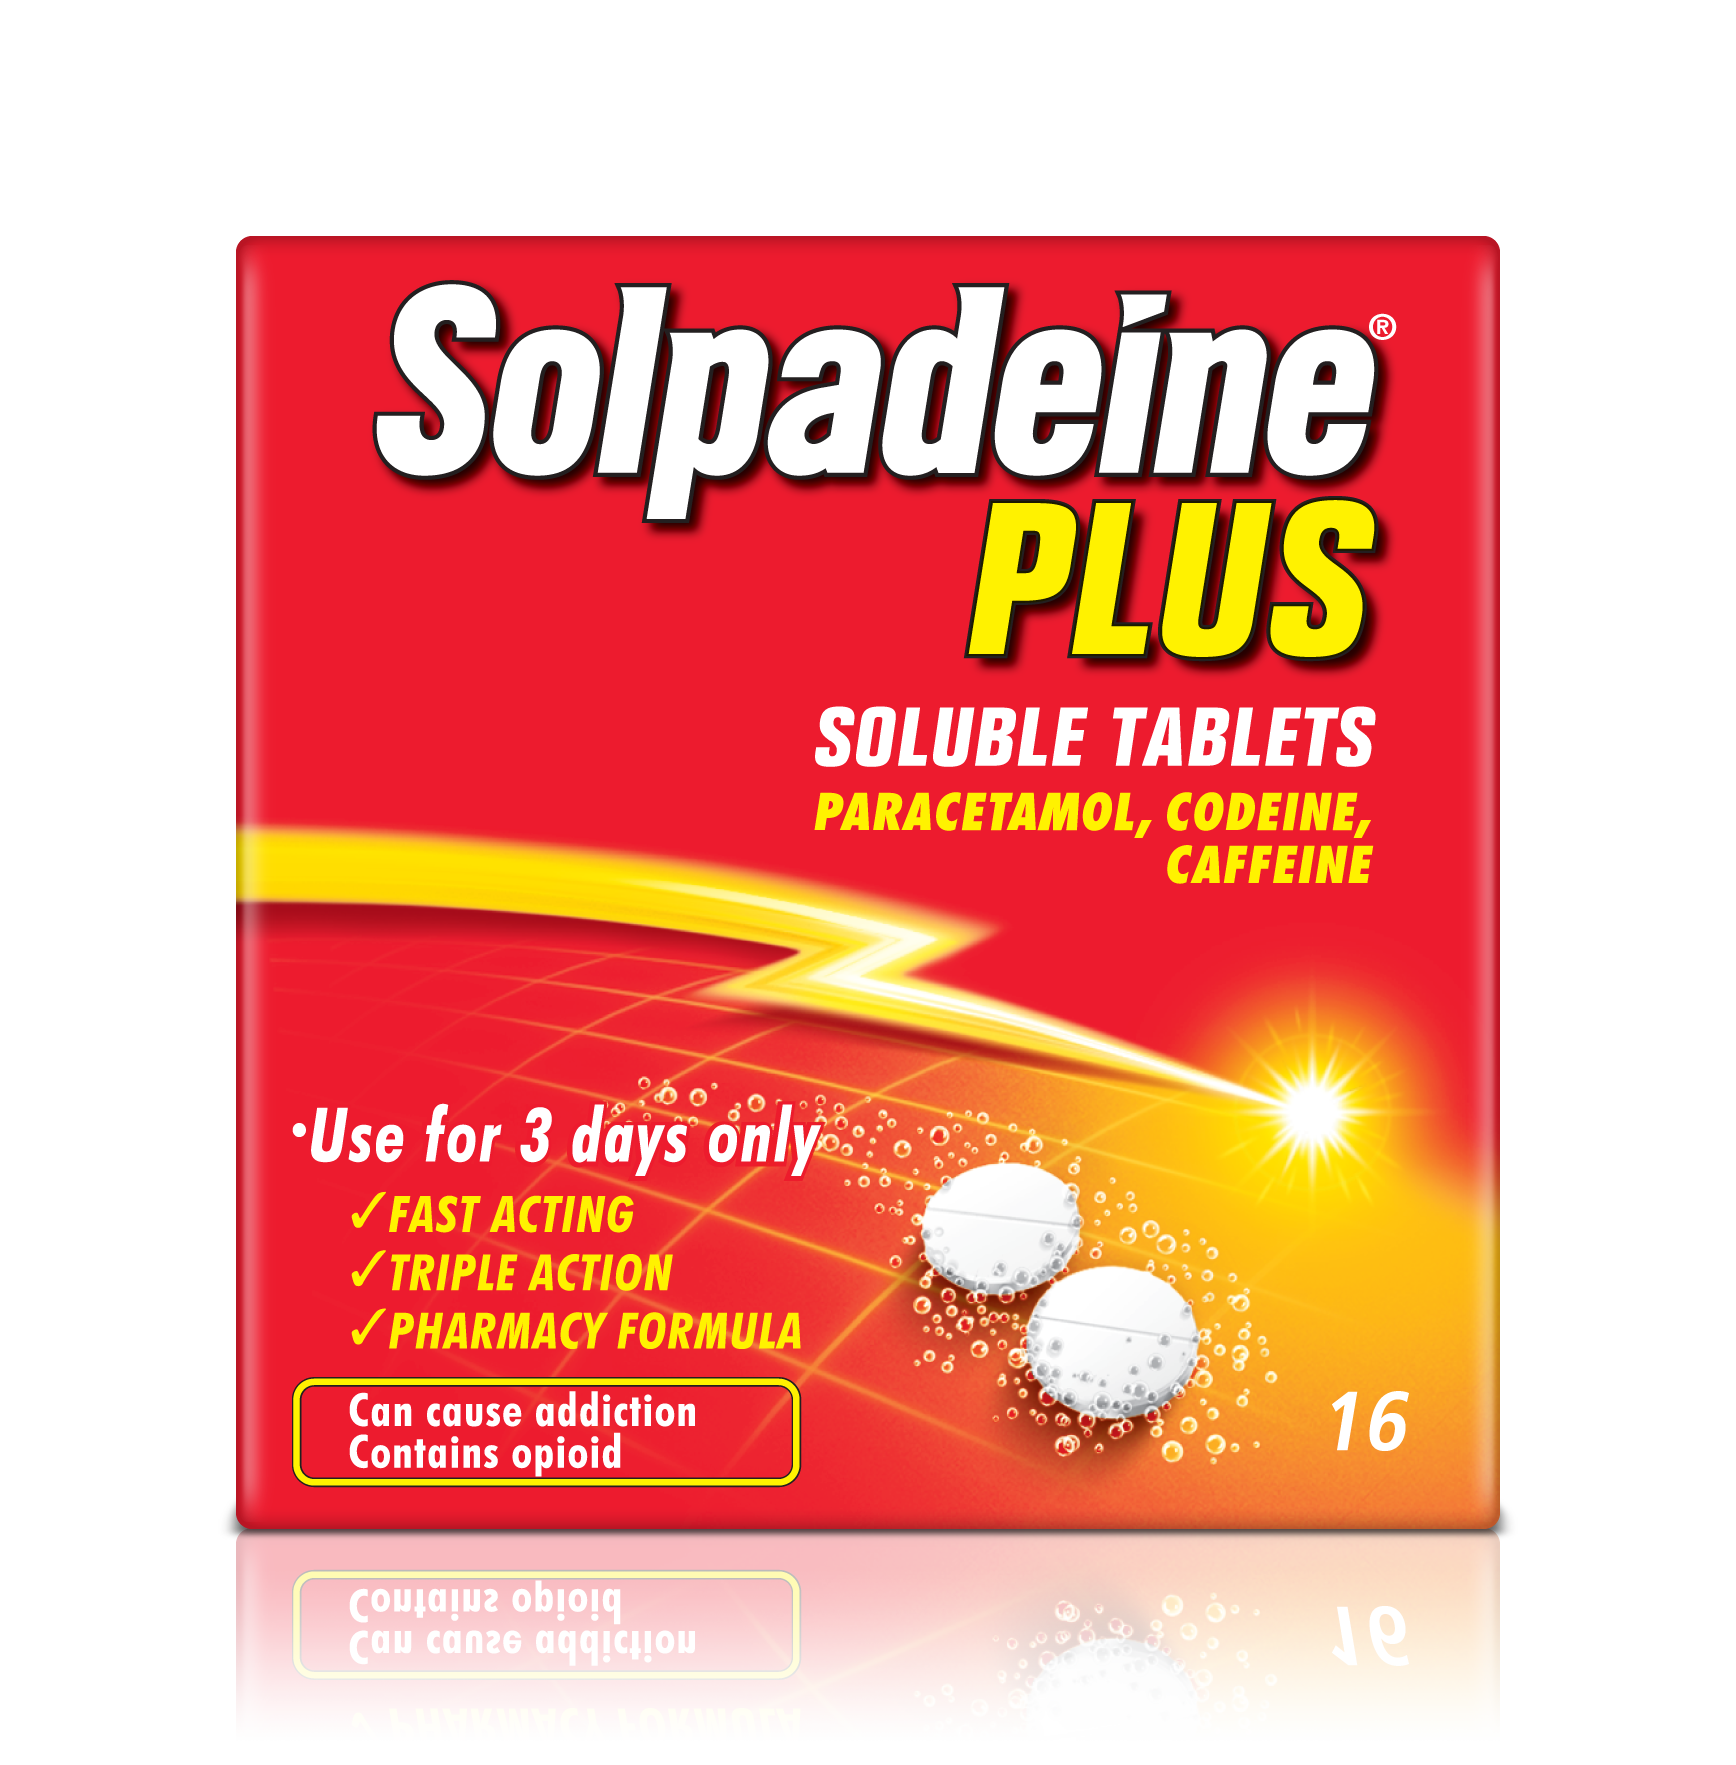 Solpadeine PLUS soluble tablets product packaging